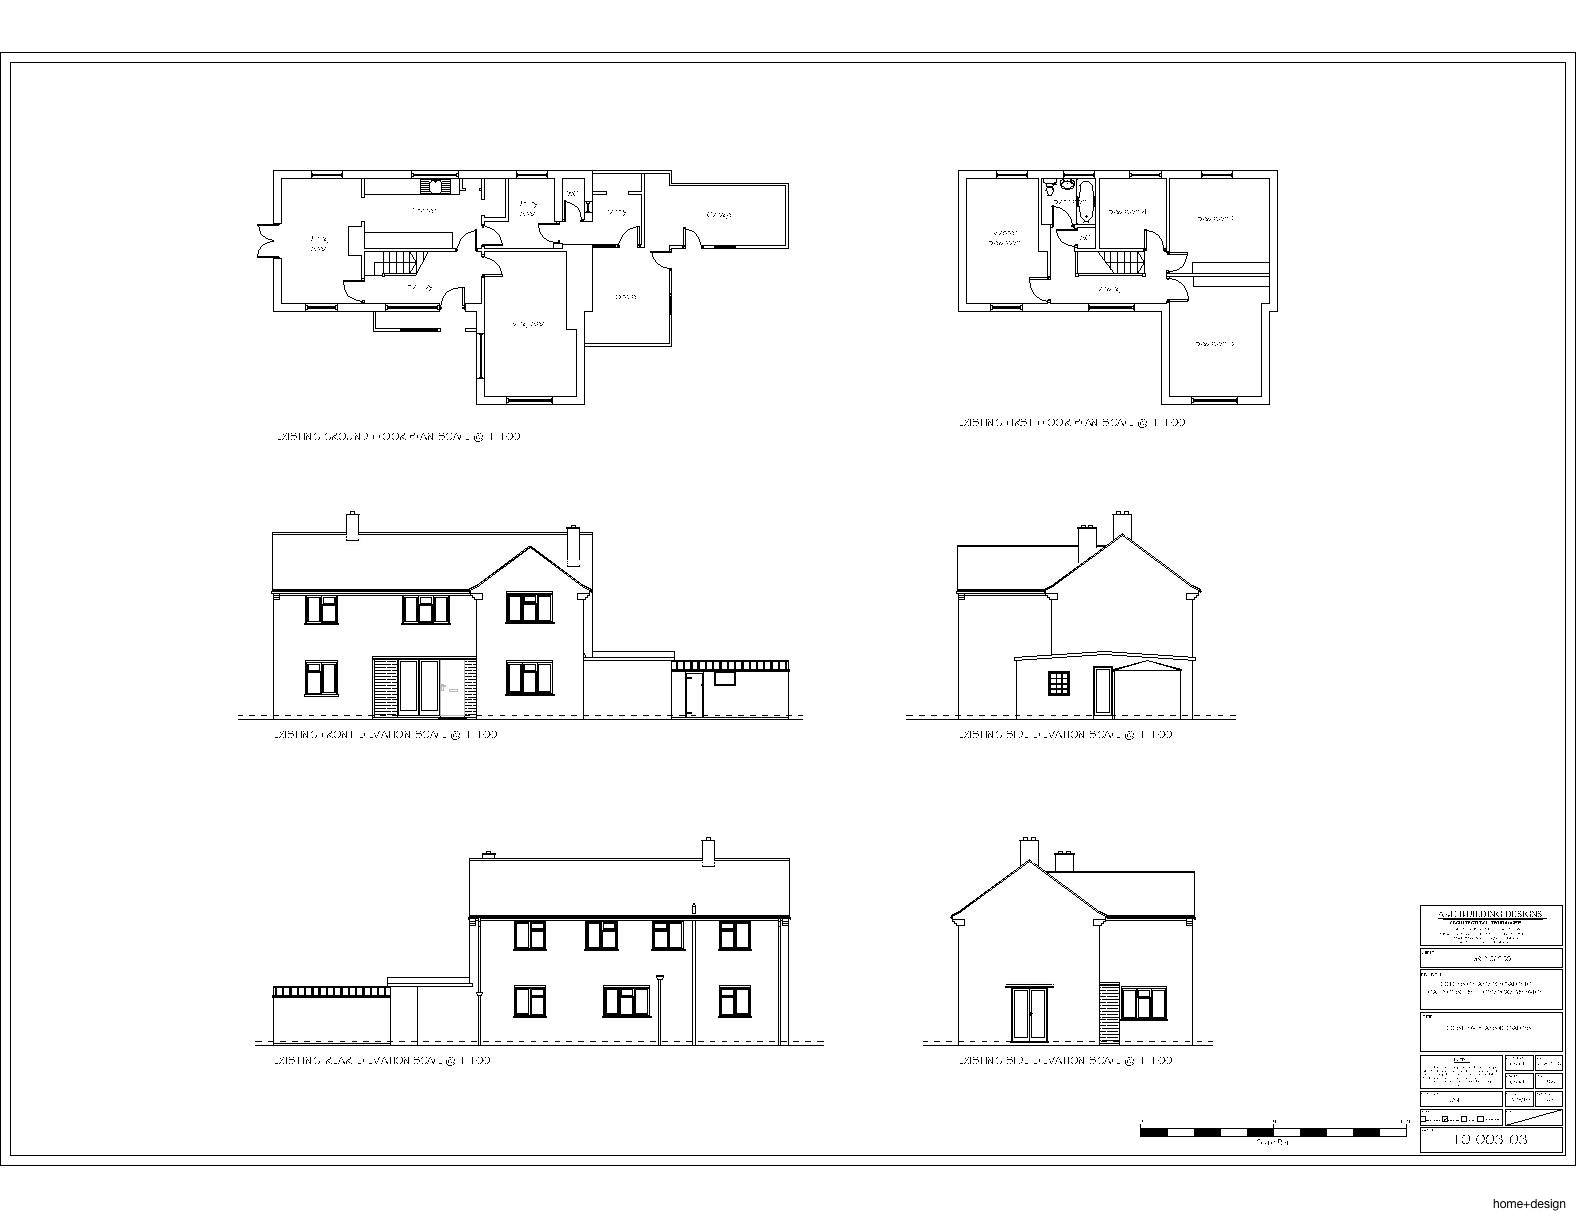 Plan Elevation Section Drawing at GetDrawings Free download